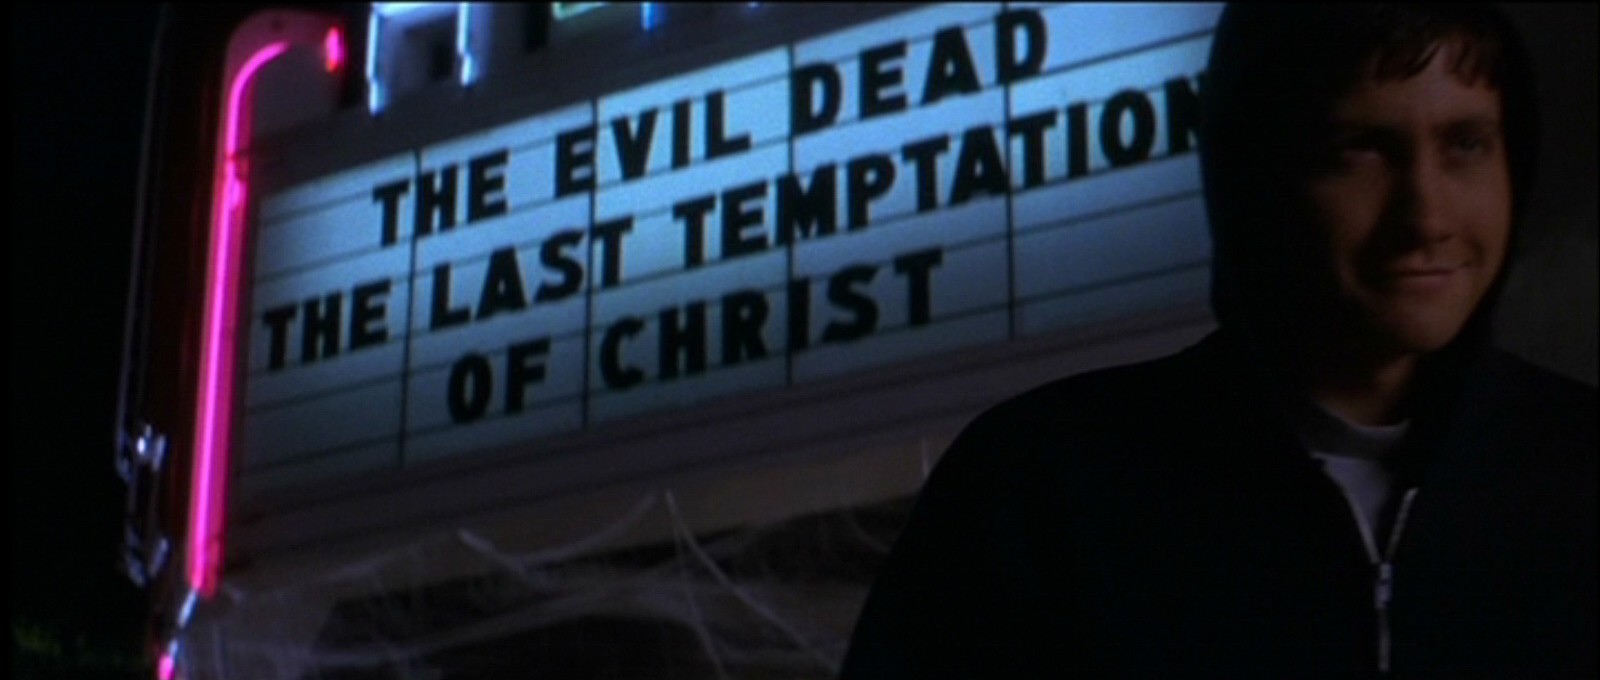 Donnie leaves the movie theater showing 'The Evil Dead' and 'The Last Temptation of Christ.'